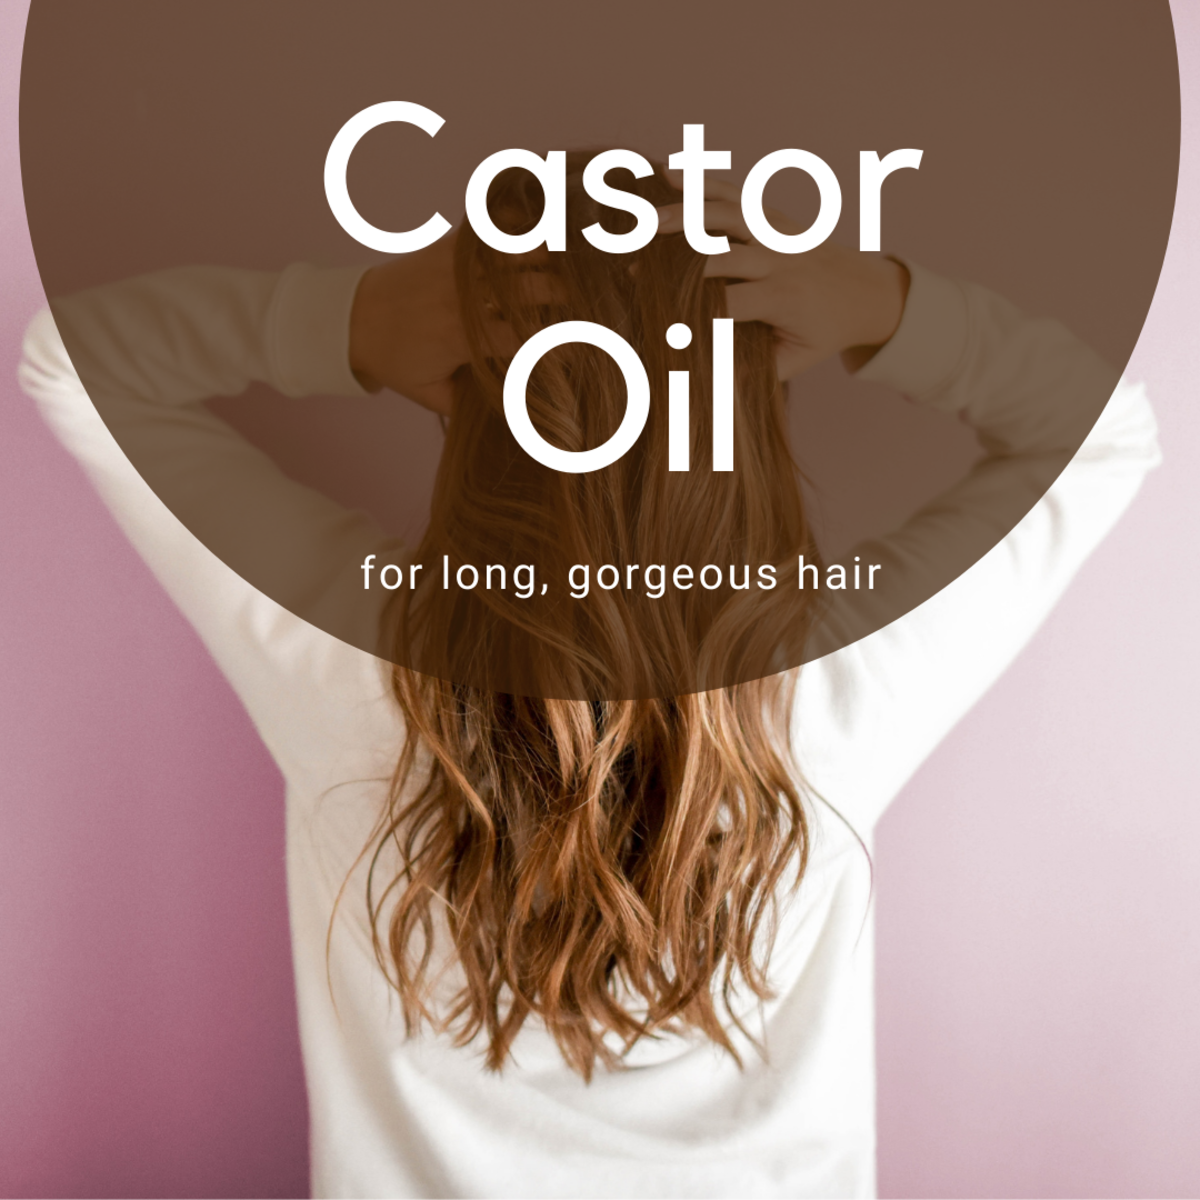 How and When to Use Castor Oil for Hair Growth